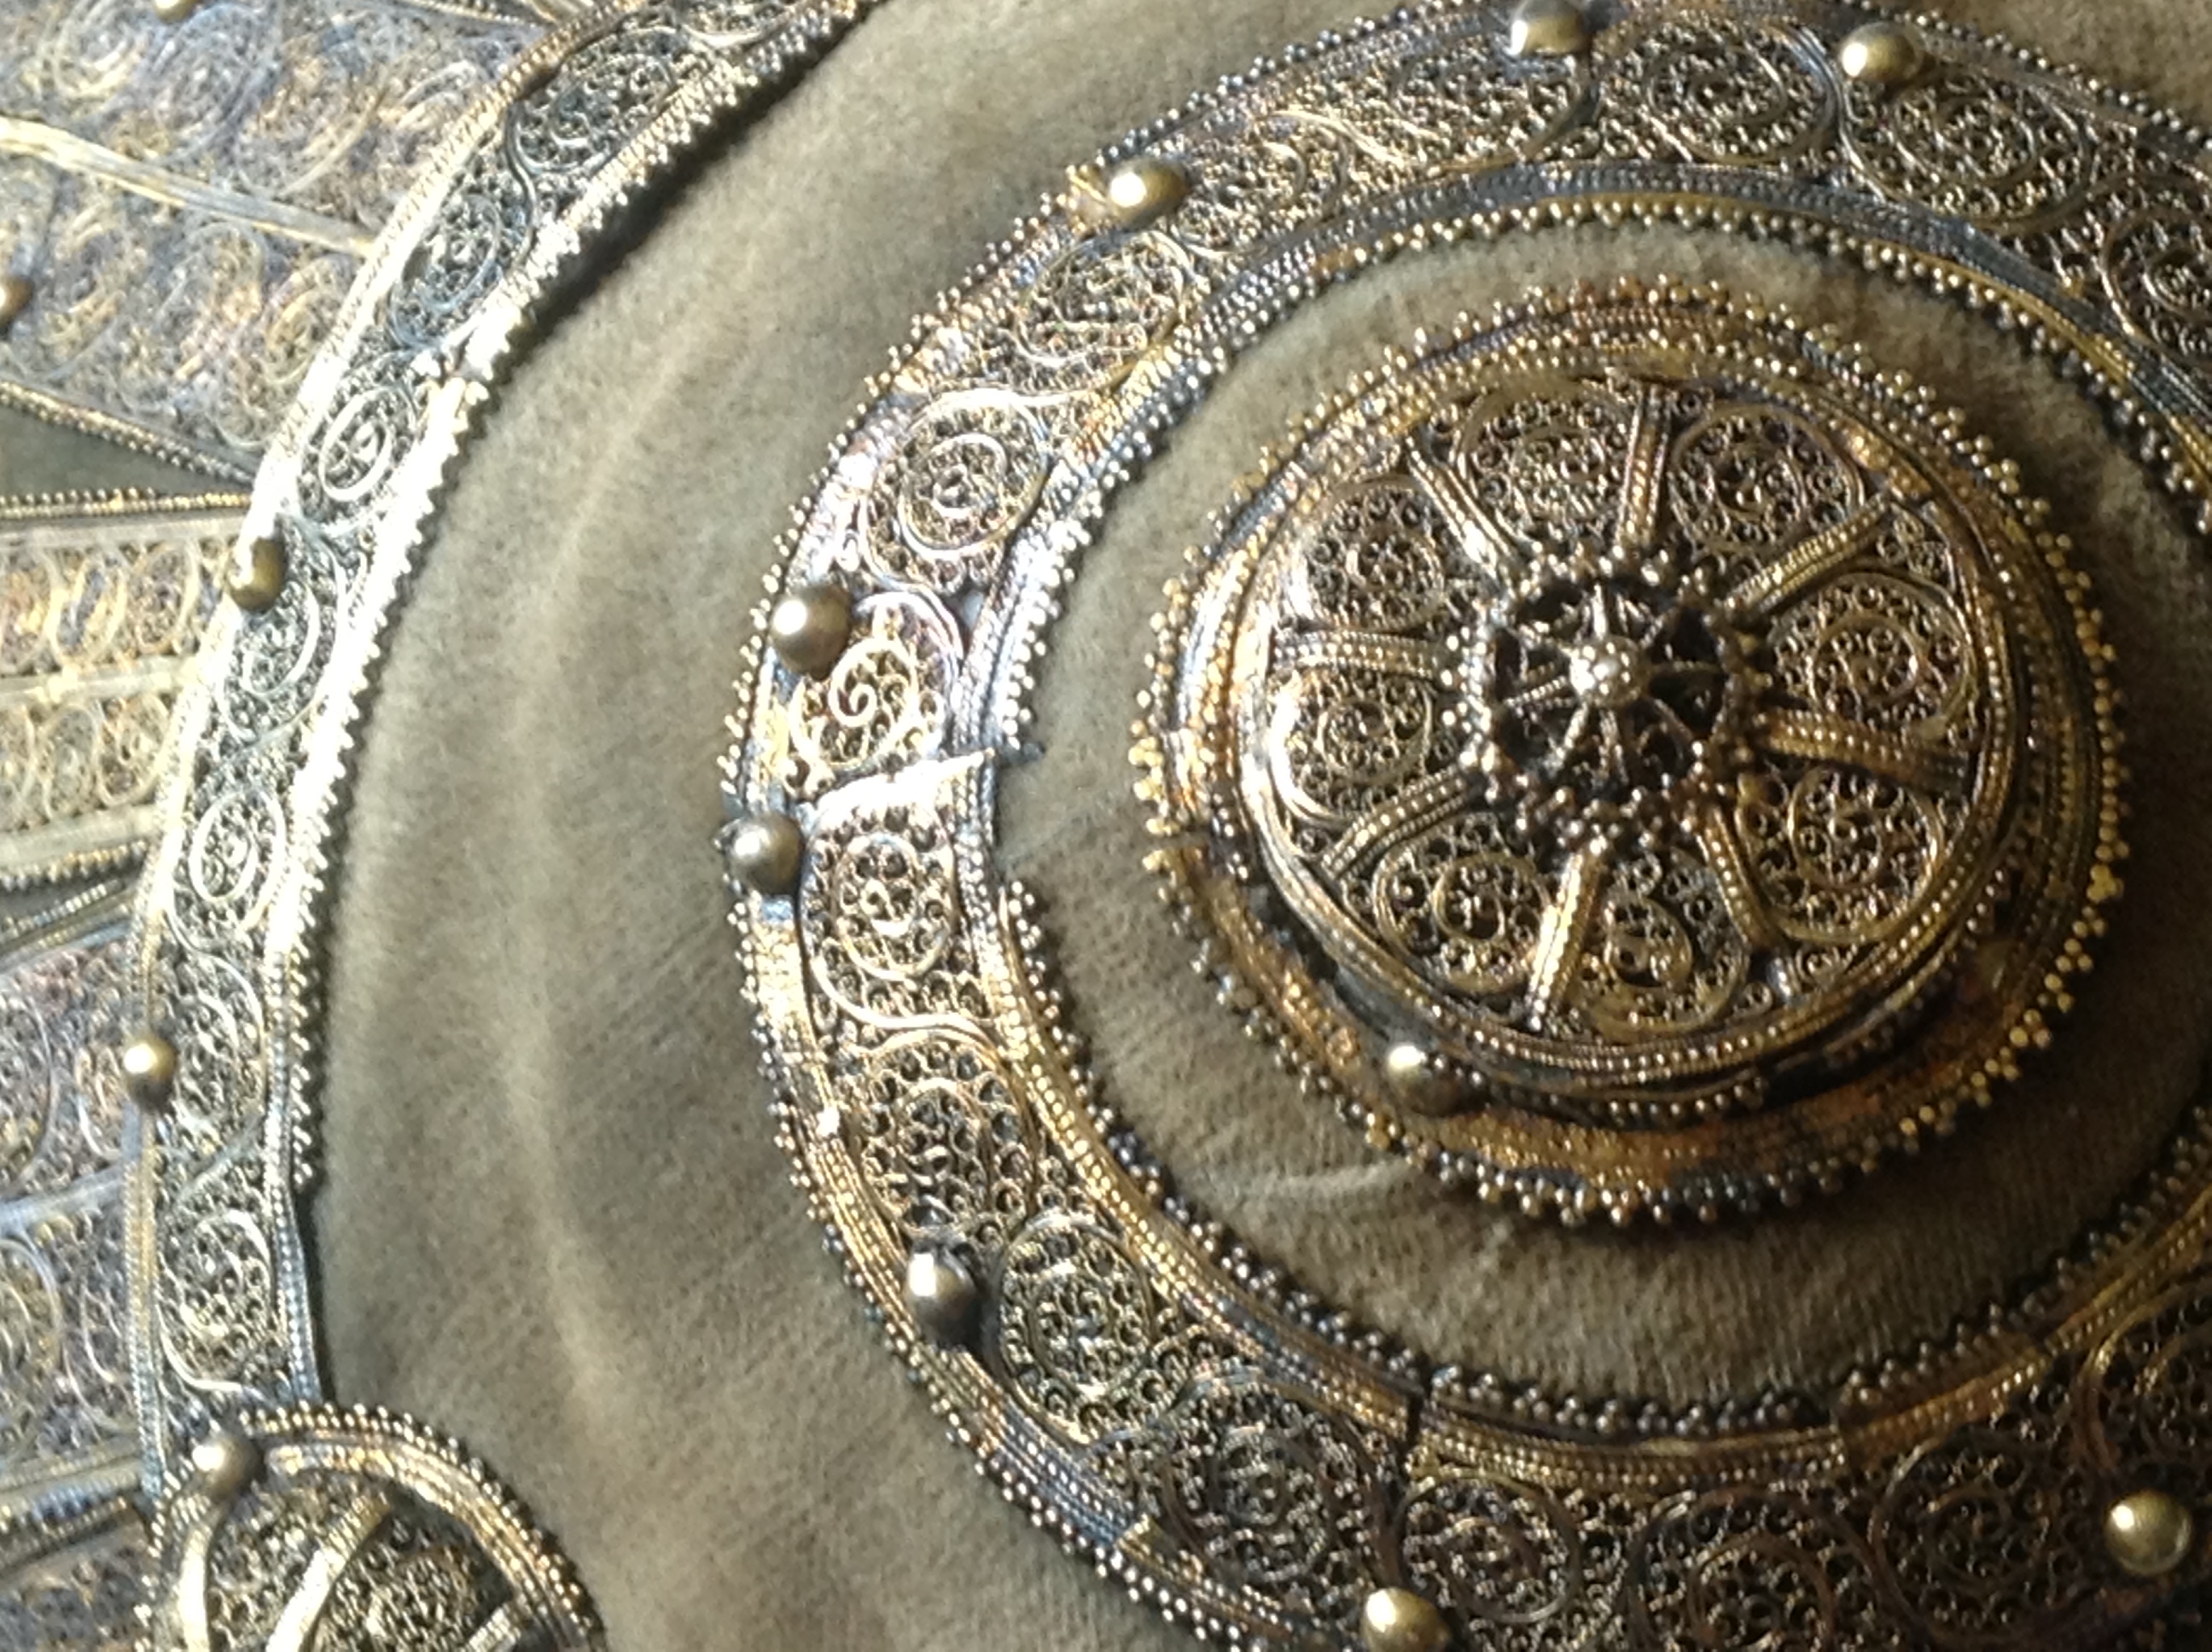 Detail from 19th century Ehtiopian shield